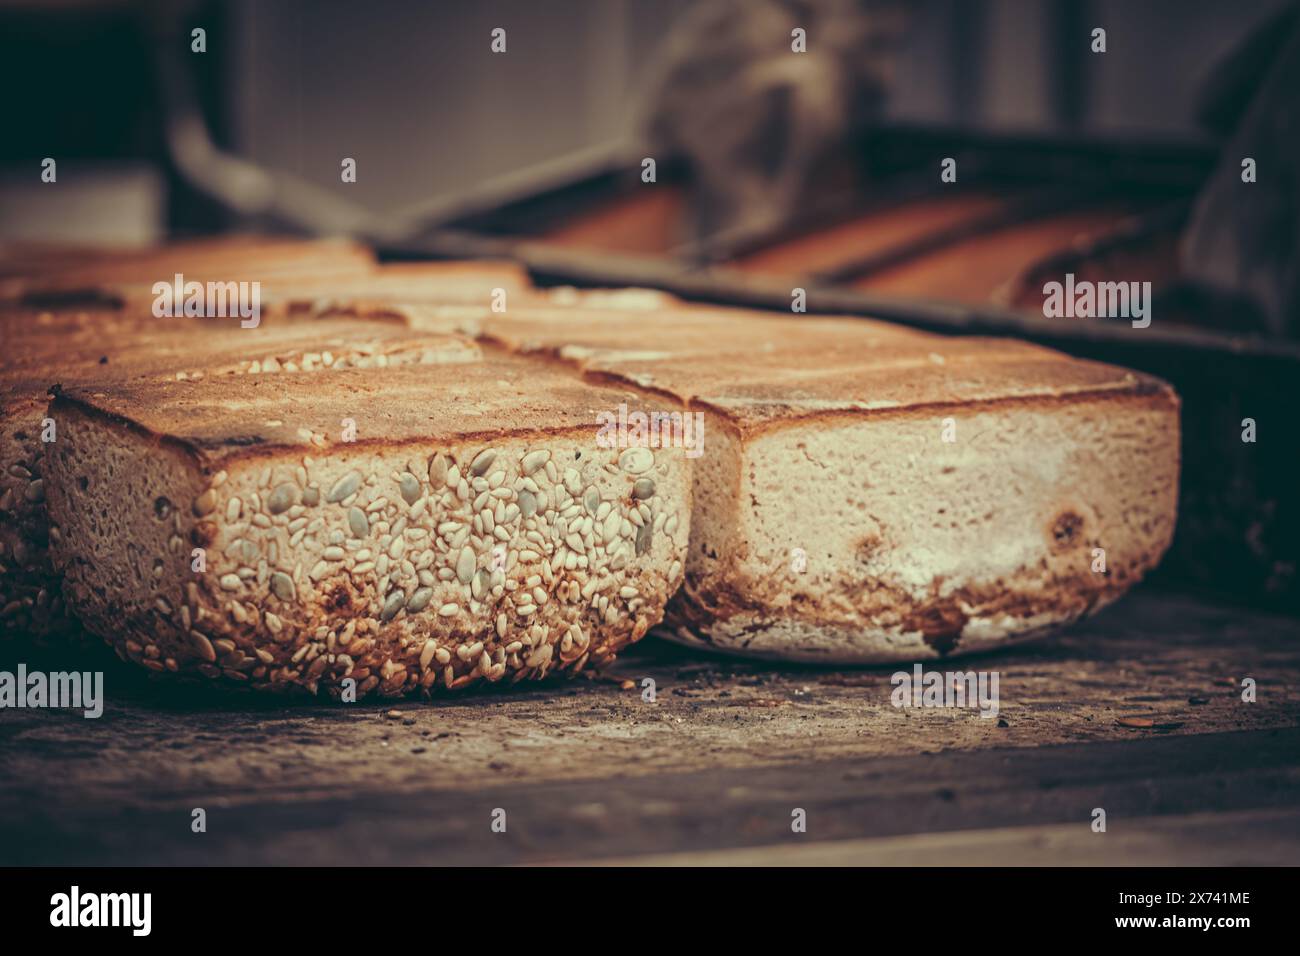 Freshly baked loaves of bread were tipped out of the baking pan upside down onto the wooden table of a bakery. Stock Photo